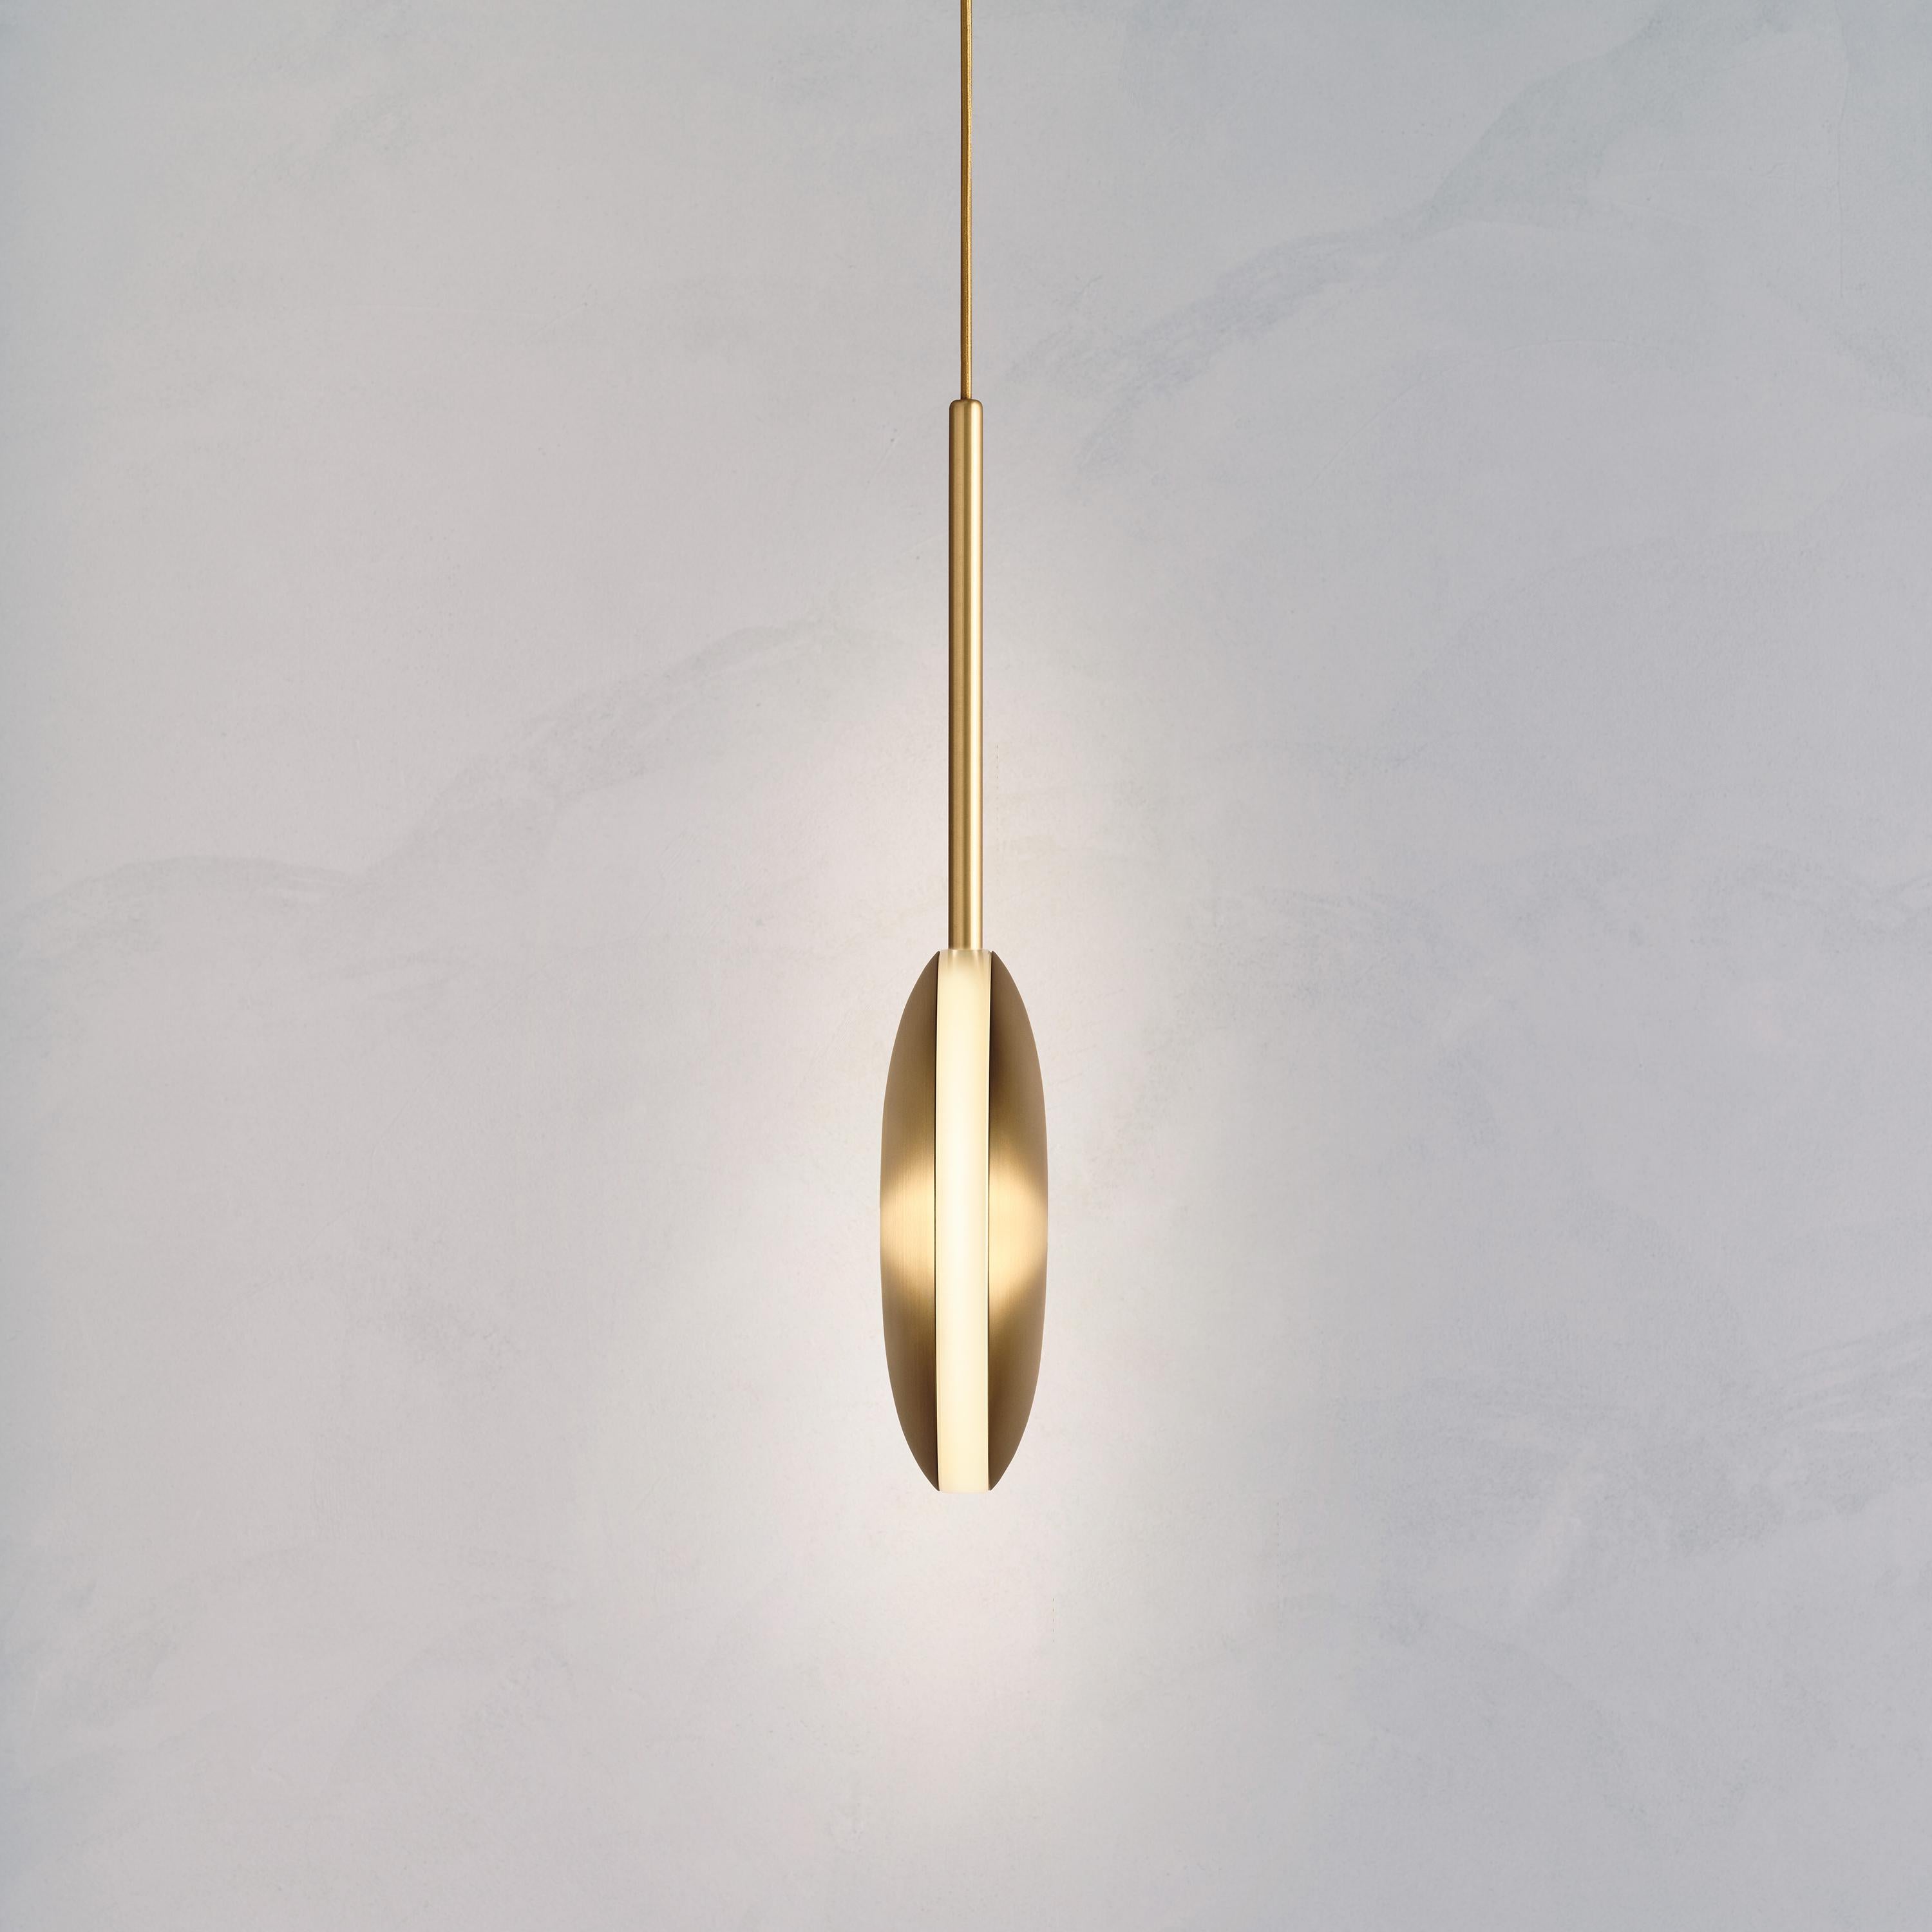 Patinated Cosmic 'Comet Pendant Sol' Handmade Artisan Pure Satin Brass Ceiling Light For Sale